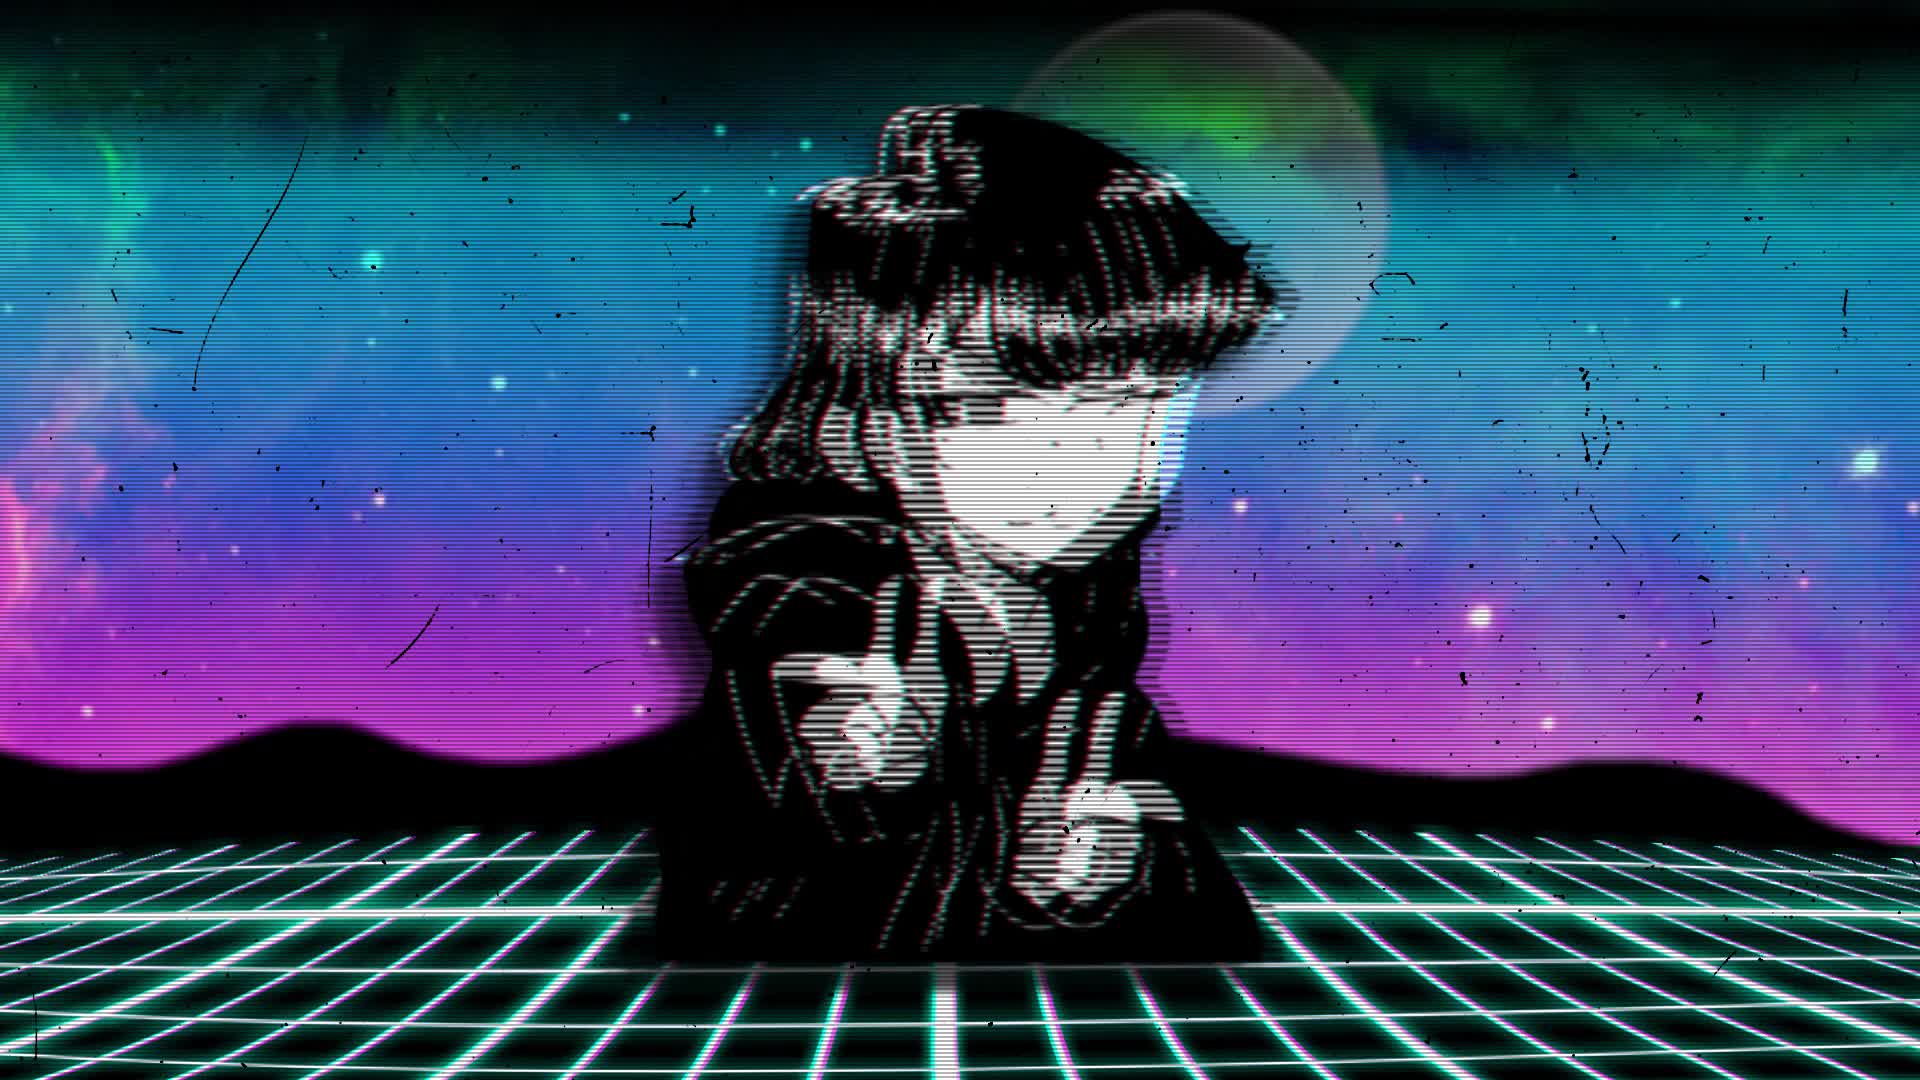 Retro Wave Anime GirlWallpapers